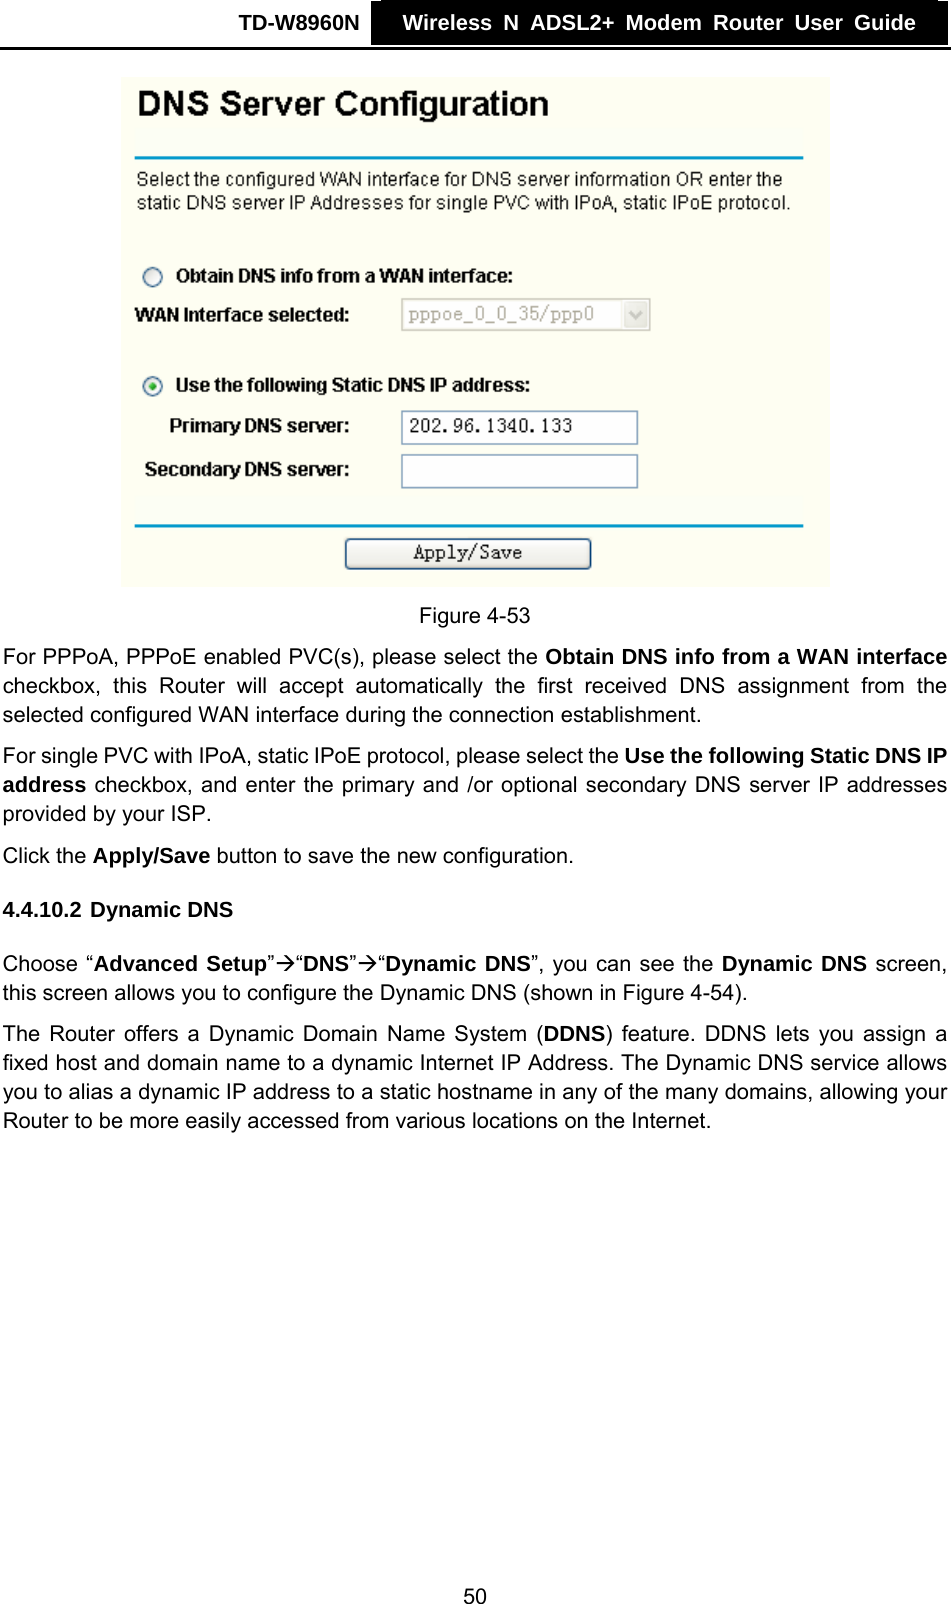 TD-W8960N    Wireless N ADSL2+ Modem Router User Guide     Figure 4-53 For PPPoA, PPPoE enabled PVC(s), please select the Obtain DNS info from a WAN interface checkbox, this Router will accept automatically the first received DNS assignment from the selected configured WAN interface during the connection establishment.  For single PVC with IPoA, static IPoE protocol, please select the Use the following Static DNS IP address checkbox, and enter the primary and /or optional secondary DNS server IP addresses provided by your ISP. Click the Apply/Save button to save the new configuration. 4.4.10.2 Dynamic DNS Choose “Advanced Setup”Æ“DNS”Æ“Dynamic DNS”, you can see the Dynamic DNS screen, this screen allows you to configure the Dynamic DNS (shown in Figure 4-54). The Router offers a Dynamic Domain Name System (DDNS) feature. DDNS lets you assign a fixed host and domain name to a dynamic Internet IP Address. The Dynamic DNS service allows you to alias a dynamic IP address to a static hostname in any of the many domains, allowing your Router to be more easily accessed from various locations on the Internet. 50 